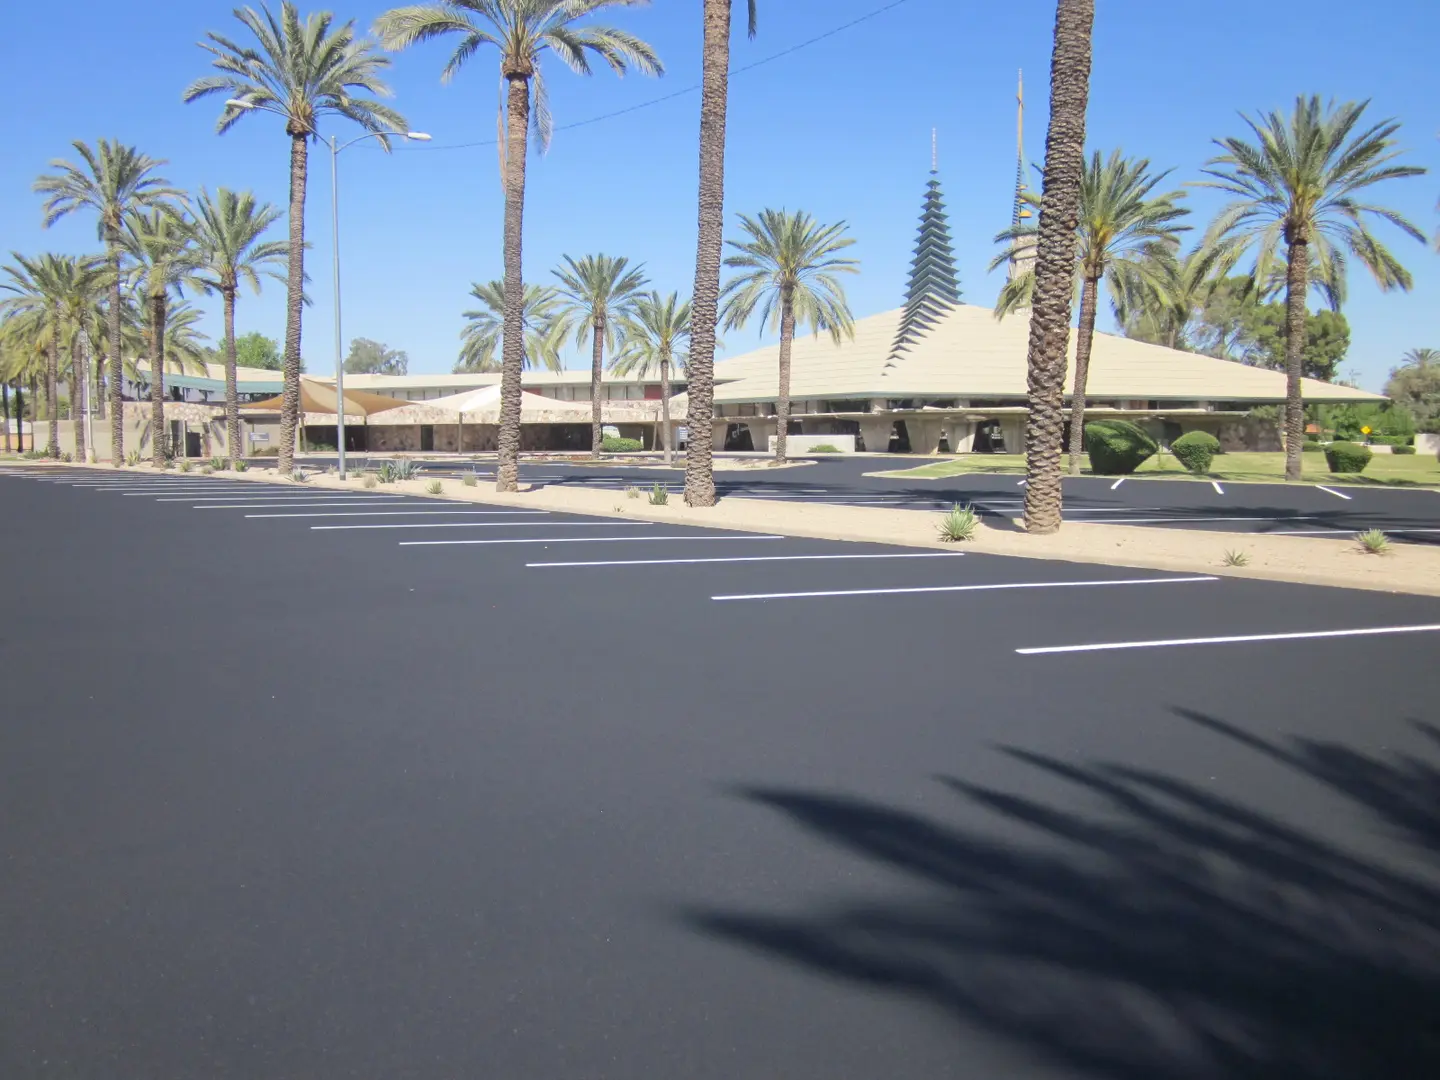 A parking lot with palm trees and a building in the background.